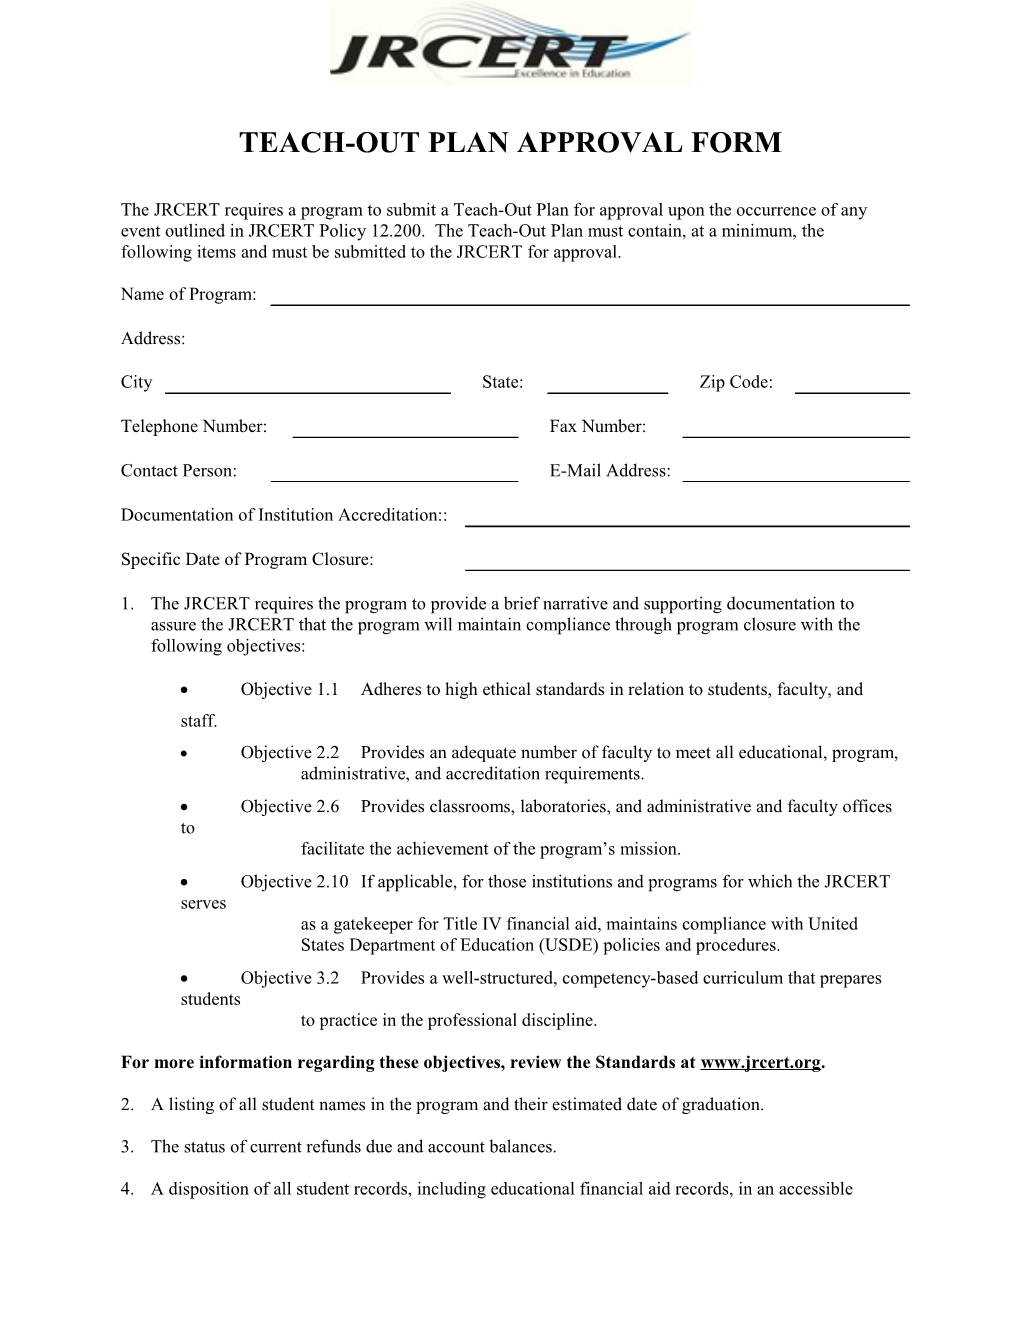 Teach-Out Planapproval Form